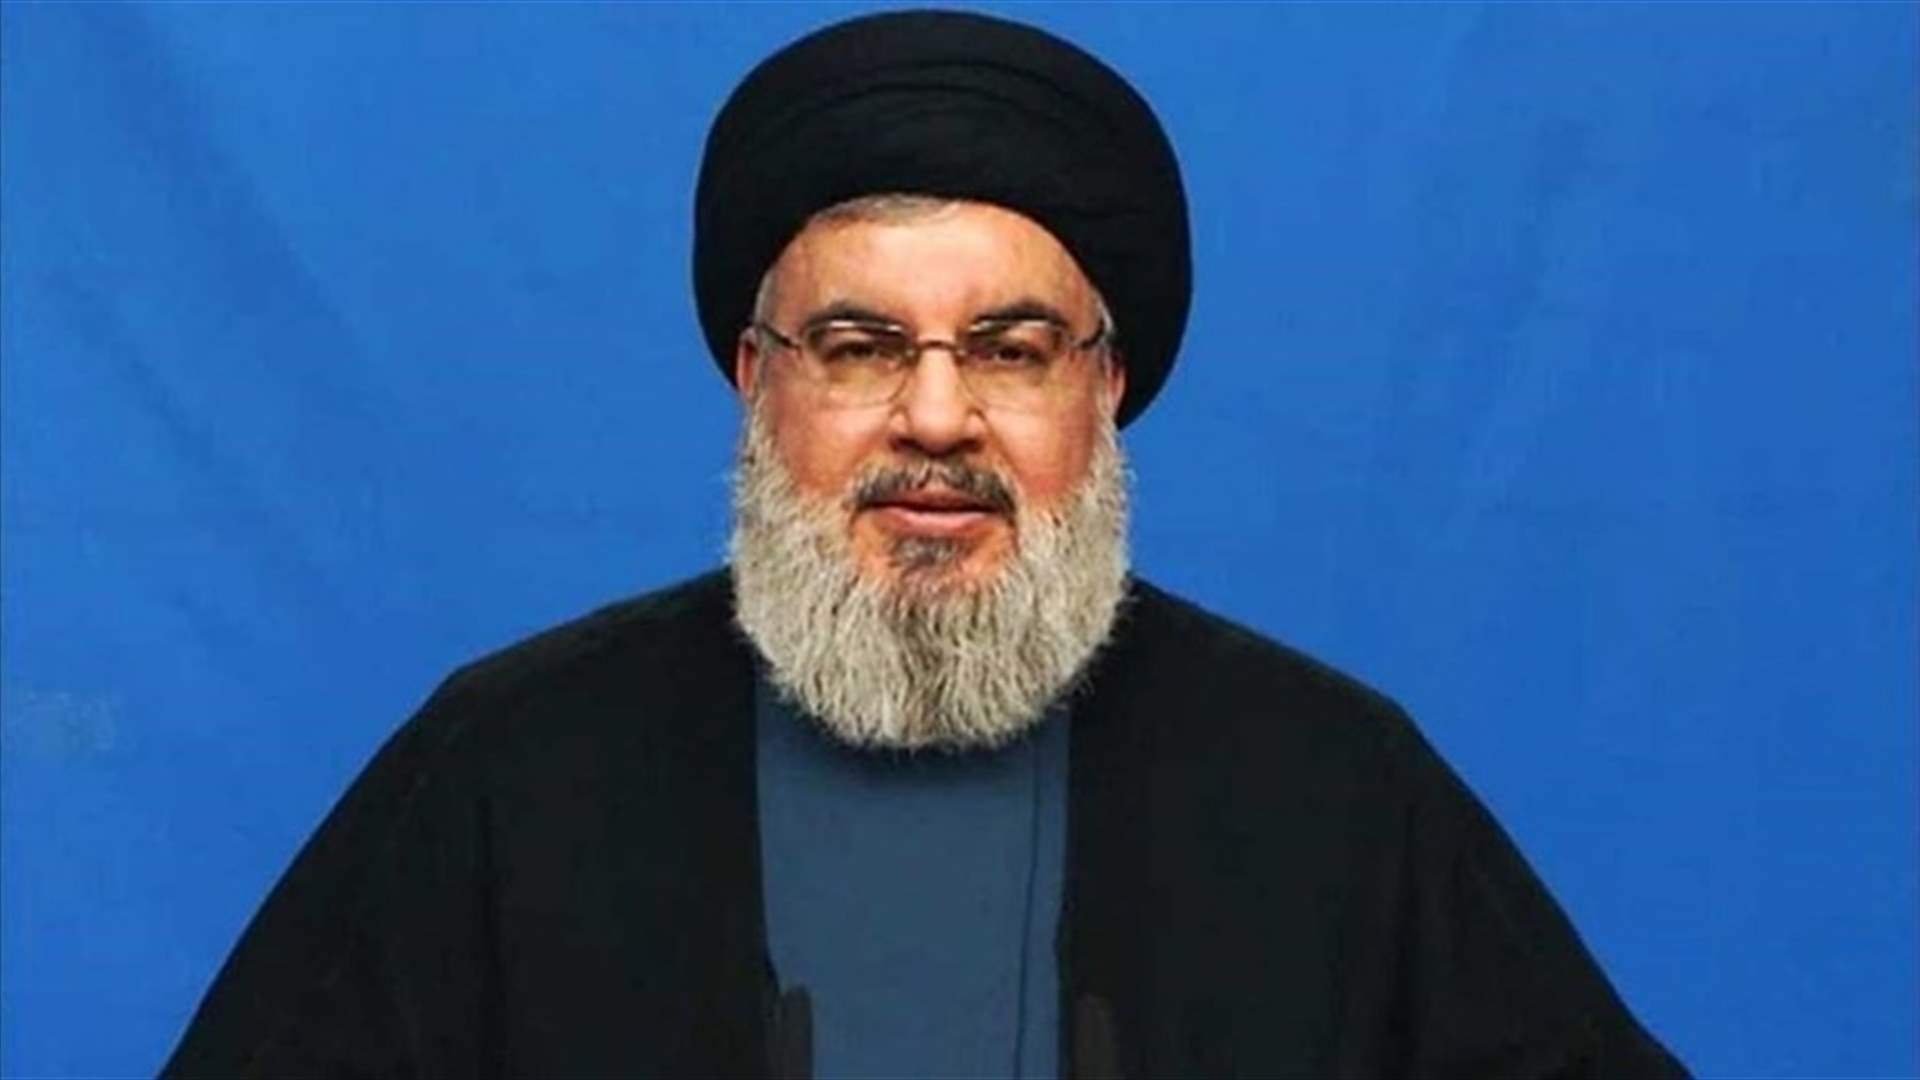 Hezbollah&#39;s Nasrallah: The targeting of Iranian consulate by Israel is one of the most significant attacks in Syria in years